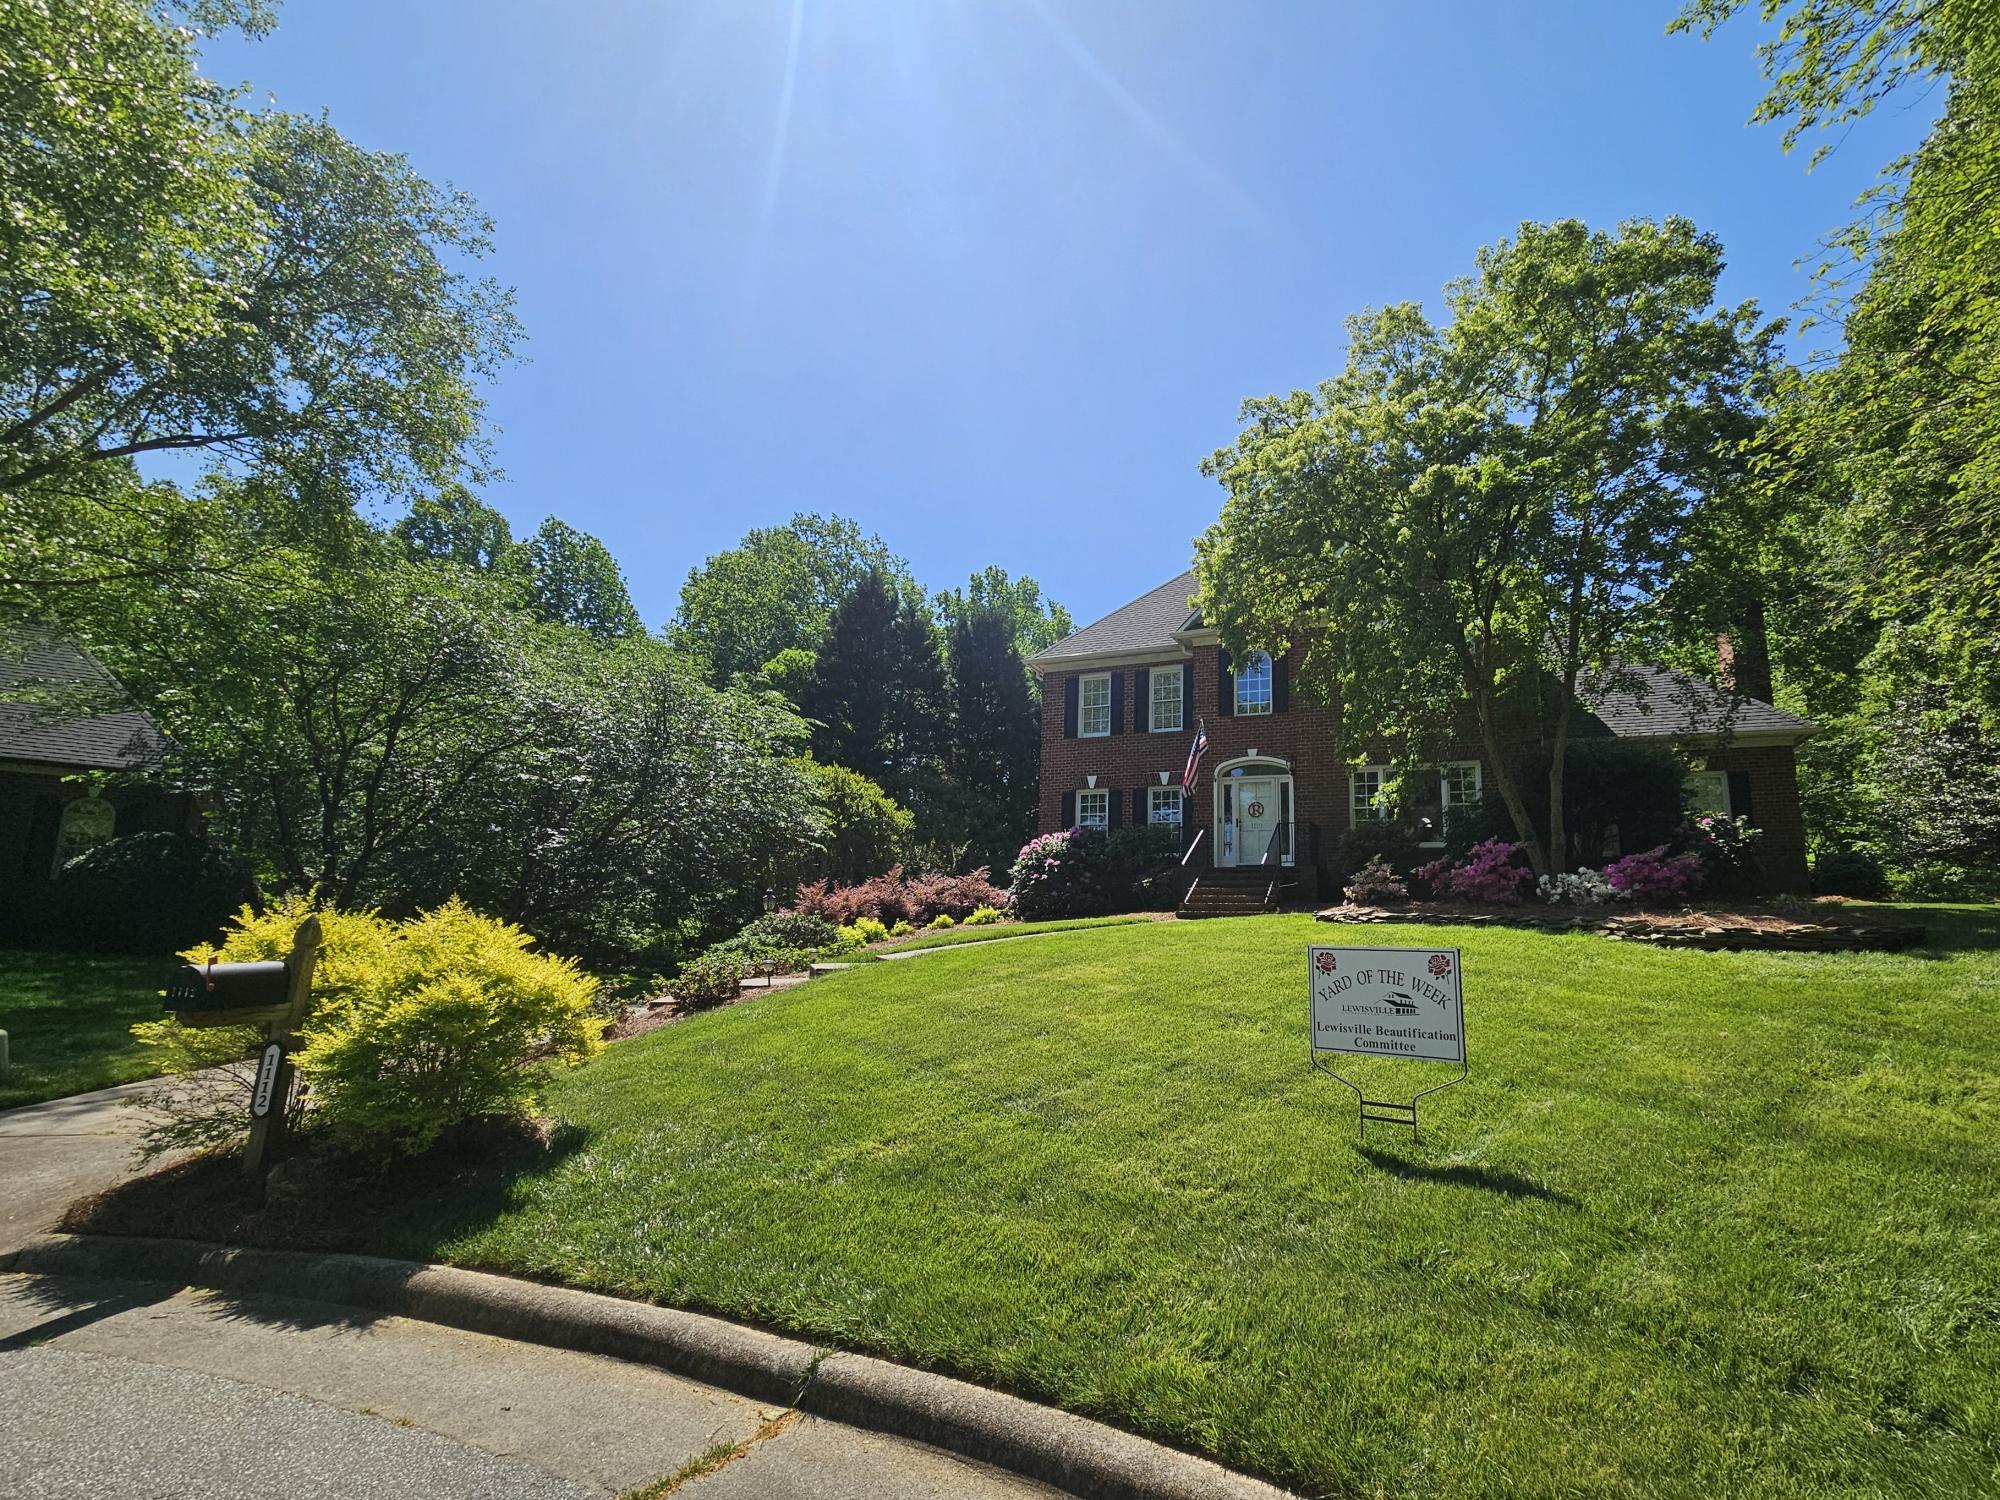 A manicured lawn in front of a brick house